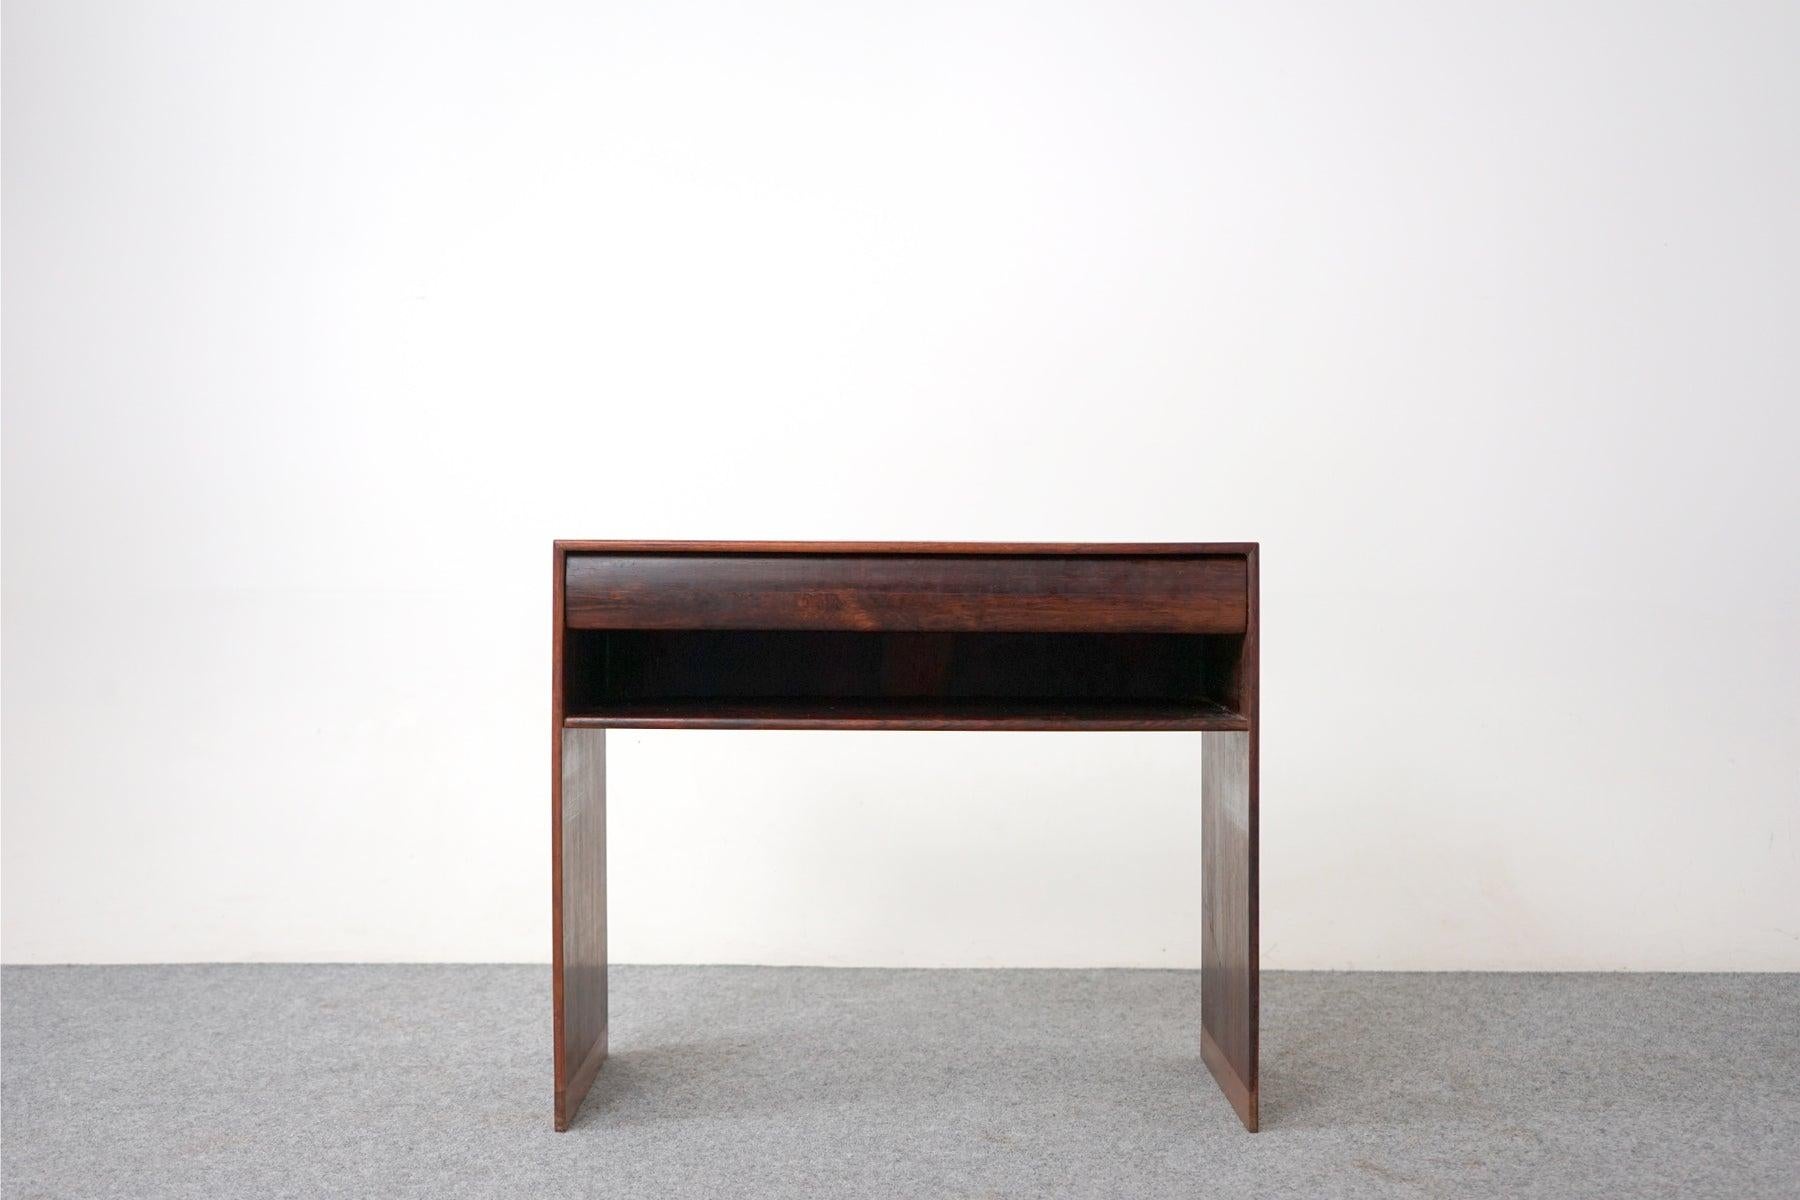 Rosewood side table circa 1960's. Compact yet highly functional table pairs perfectly with lounge chairs or anywhere extra surface is needed. Finished on both sides, it can work in every spot in the room, sleek drawer and convenient lower